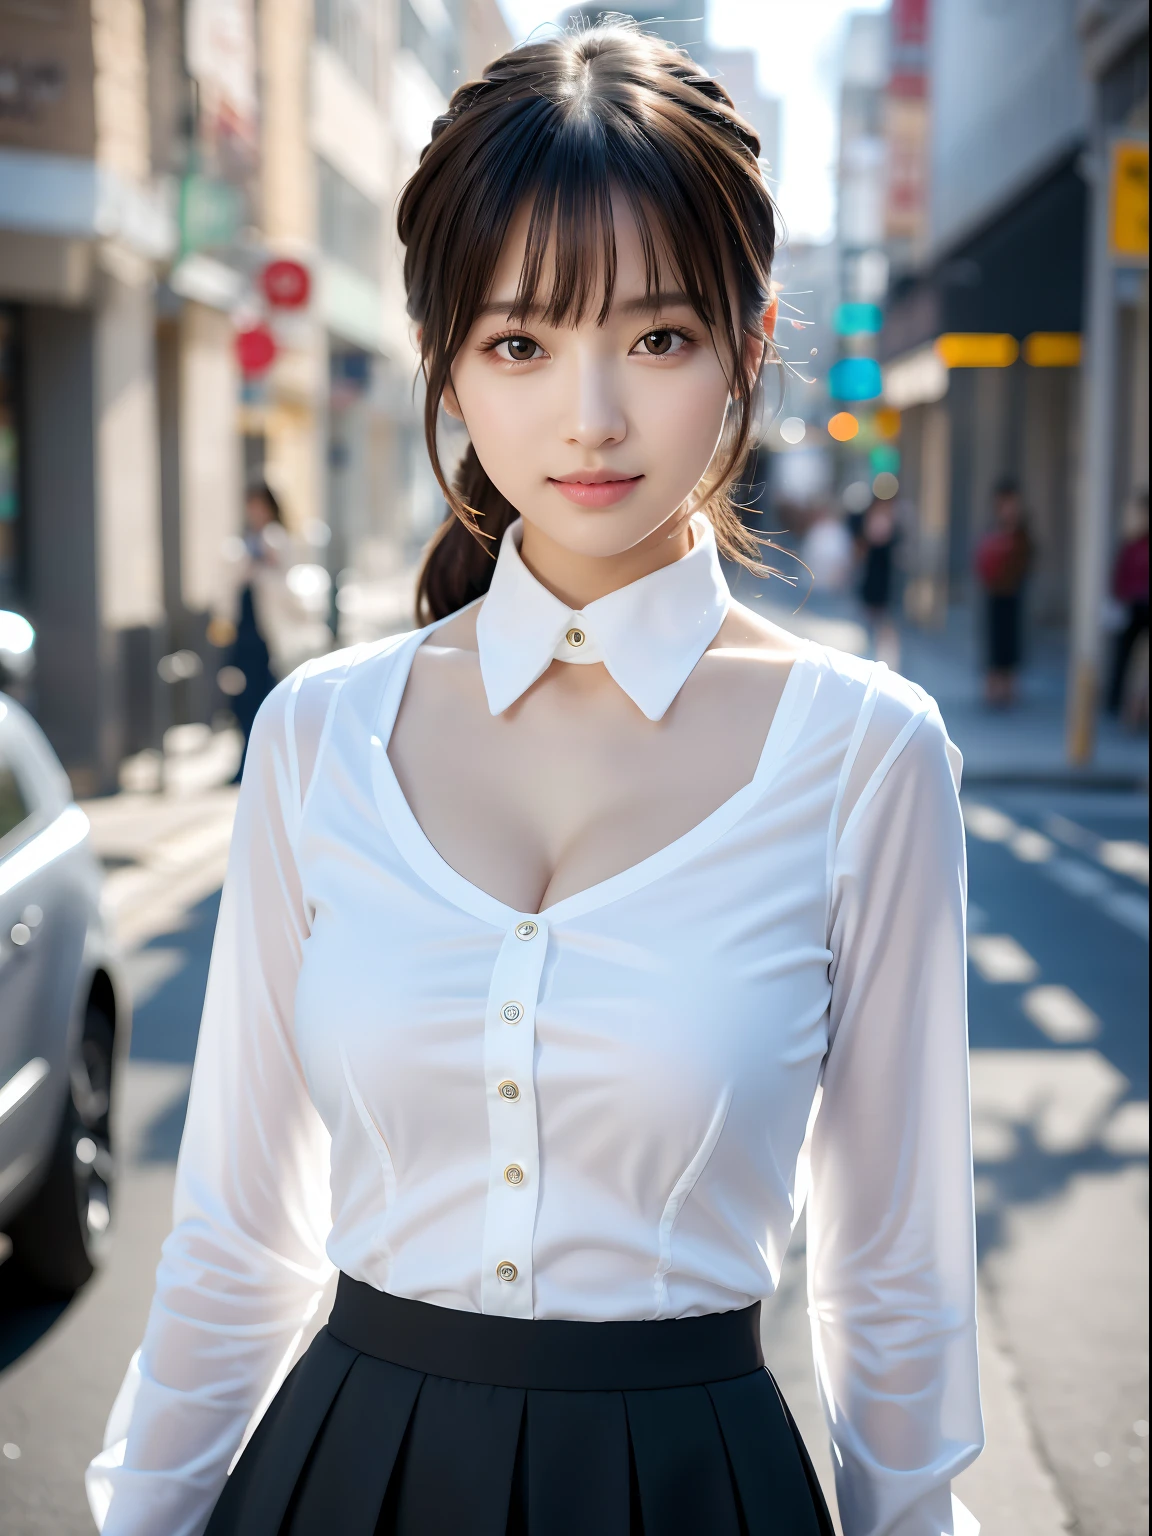 (masutepiece:1.3), (8K, Photorealistic, Raw photo, Best Quality: 1.4), Japanese, (1girl in), Beautiful face, (Realistic face), (Black hair), Beautiful hairstyle, Realistic eyes, Beautiful detailed eyes, (Realistic skin), Beautiful skin, Attractive, 超A high resolution, A hyper-realistic, Highly detailed, Golden ratio、 Show from the hips to the shoulders, Beautiful detailed skin, (Cute:1.2), (Black hair), ((JPOP Idol)), (upper thigh:0.6), (depth of fields),Soft light, Lens Glow, Looking at Viewer, (drooping eyes:1.2), Straight teeth,Smile, Floating hair, (a blond:1.2), Brown eyes, Movie Scene, Cinematic, fulcolor, 4K, 8K, 16 K, Raw photo, masutepiece, professionally color graded, Professional Photography, cleavage,High School Girl, Hair UP, Think,(Sweat,Sigh)1.2,(blush,Open mouth)1.3,soft clean focus, Realistic lighting and shading, (an extremely delicate and beautiful art)1.3, Elegant,Active Angle,Dynamism Pose, Photorealistic, (One pretty girl:1.1), hight resolution, ultraclear, Sharp Focus, ,Cosplay, slim, Sheer white cloth,White hair, High Ponytail, (Off-White Damask Long Sleeve Shirt Dress:1.3), (Thom Brown Design Dress:1.4), (hyper detailed background, Detail Background: 1.3), Bokeh, depth of fields, China City Street, No one in the background,(Skirt flipping、Pink panty:1.1)